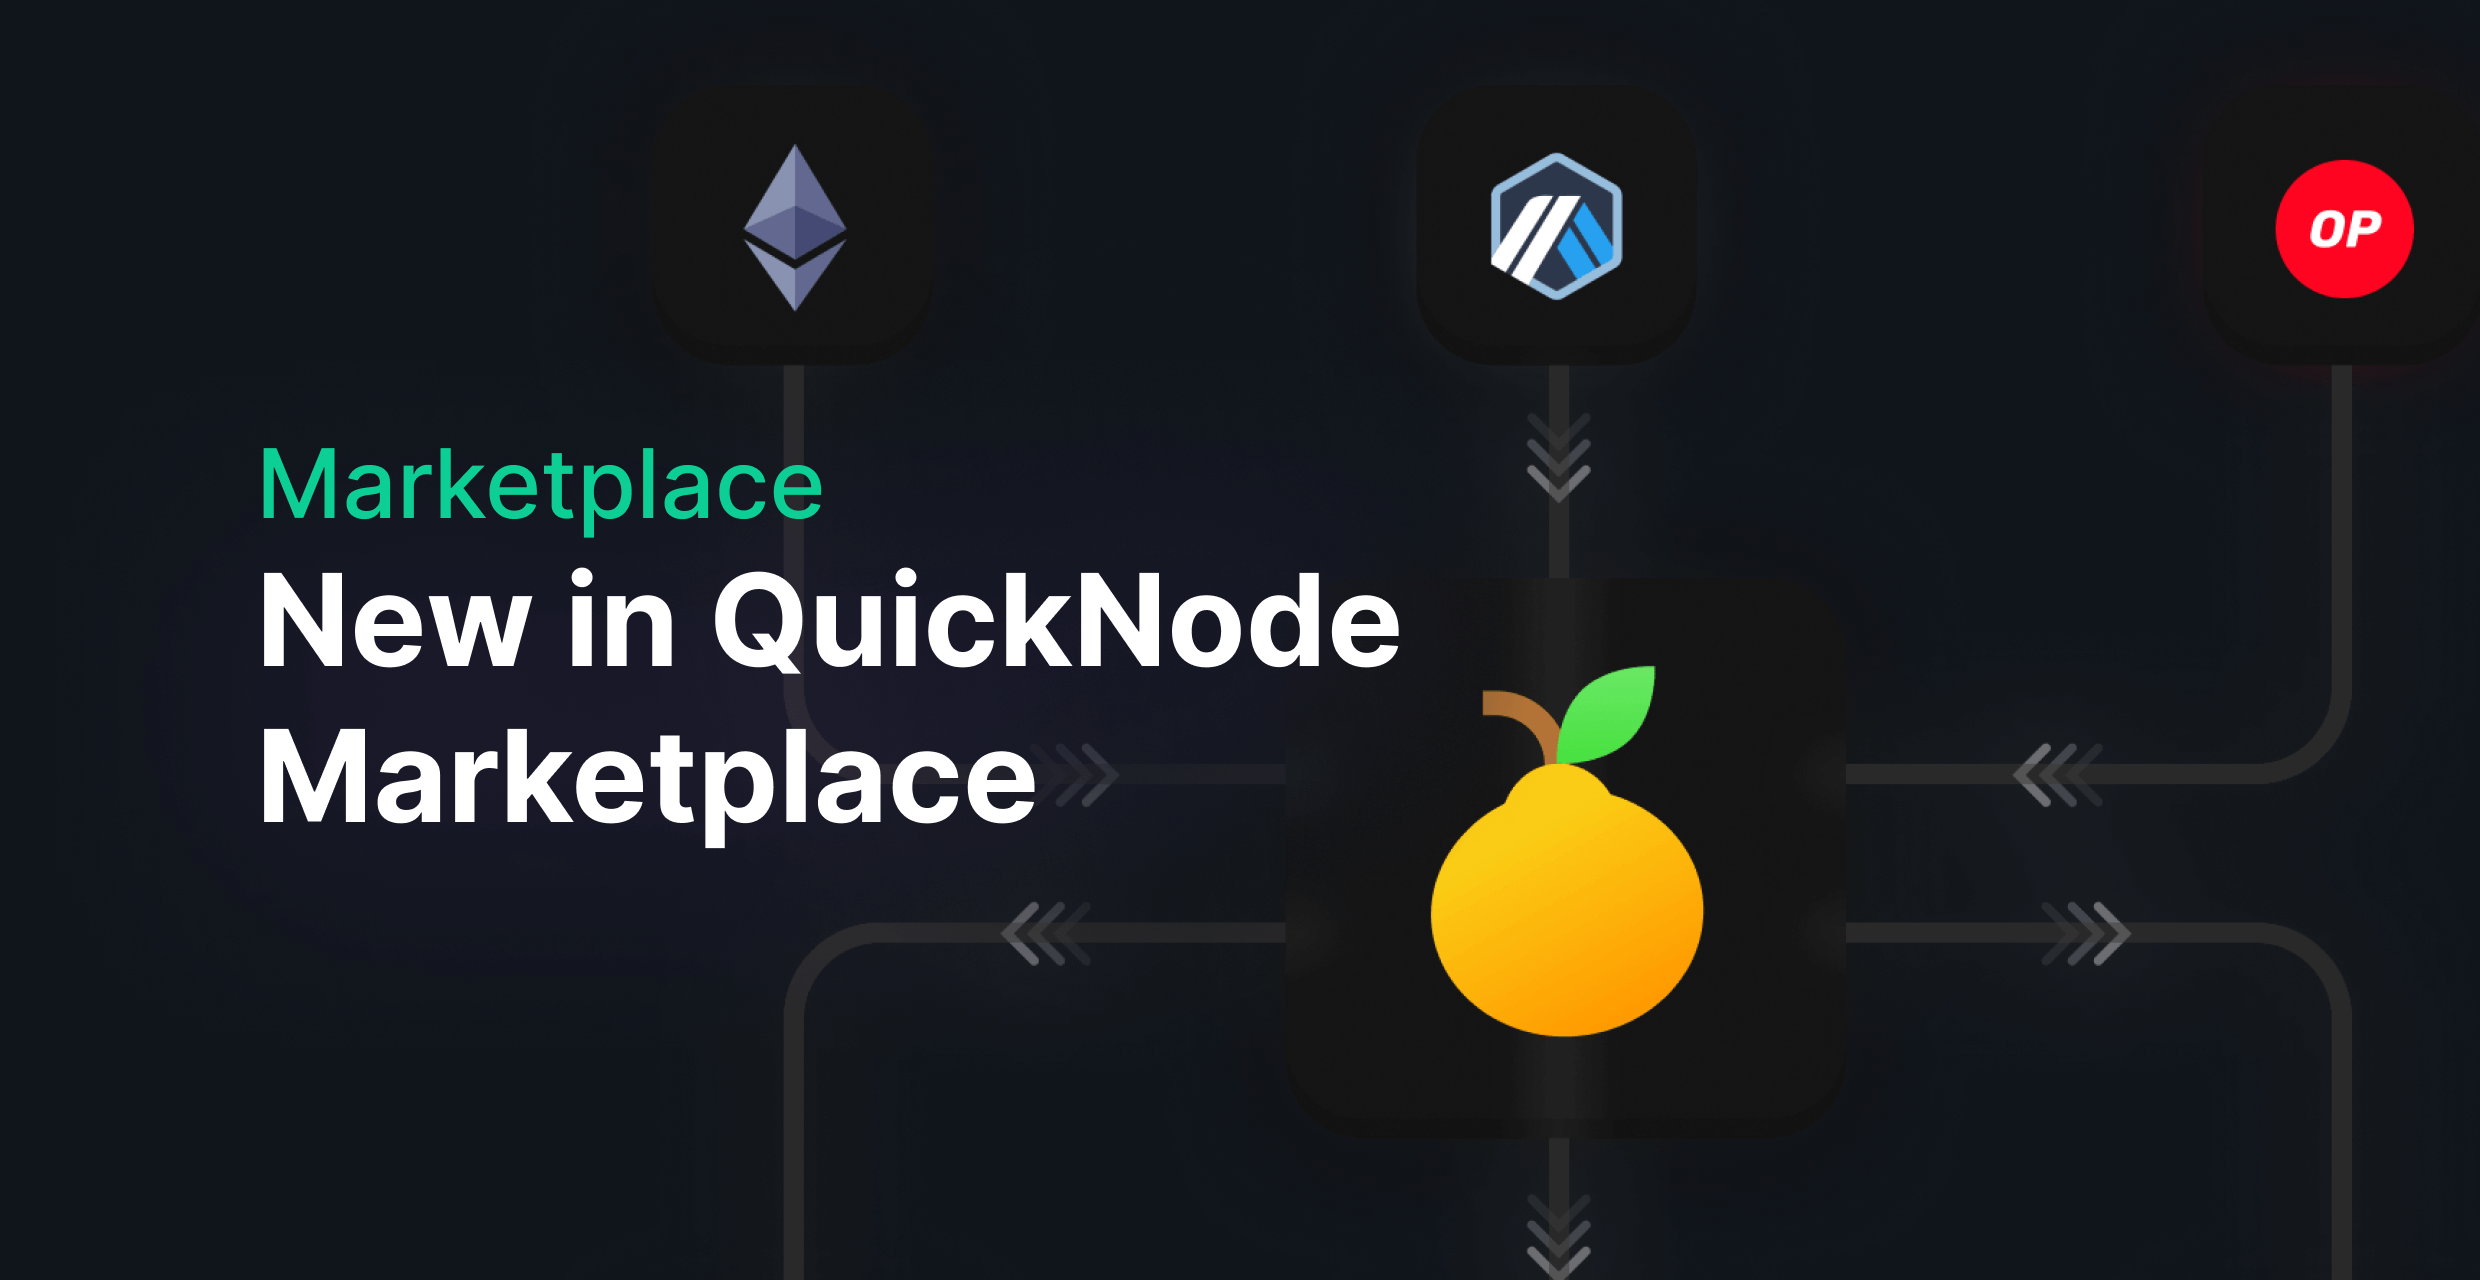 New in QuickNode Marketplace